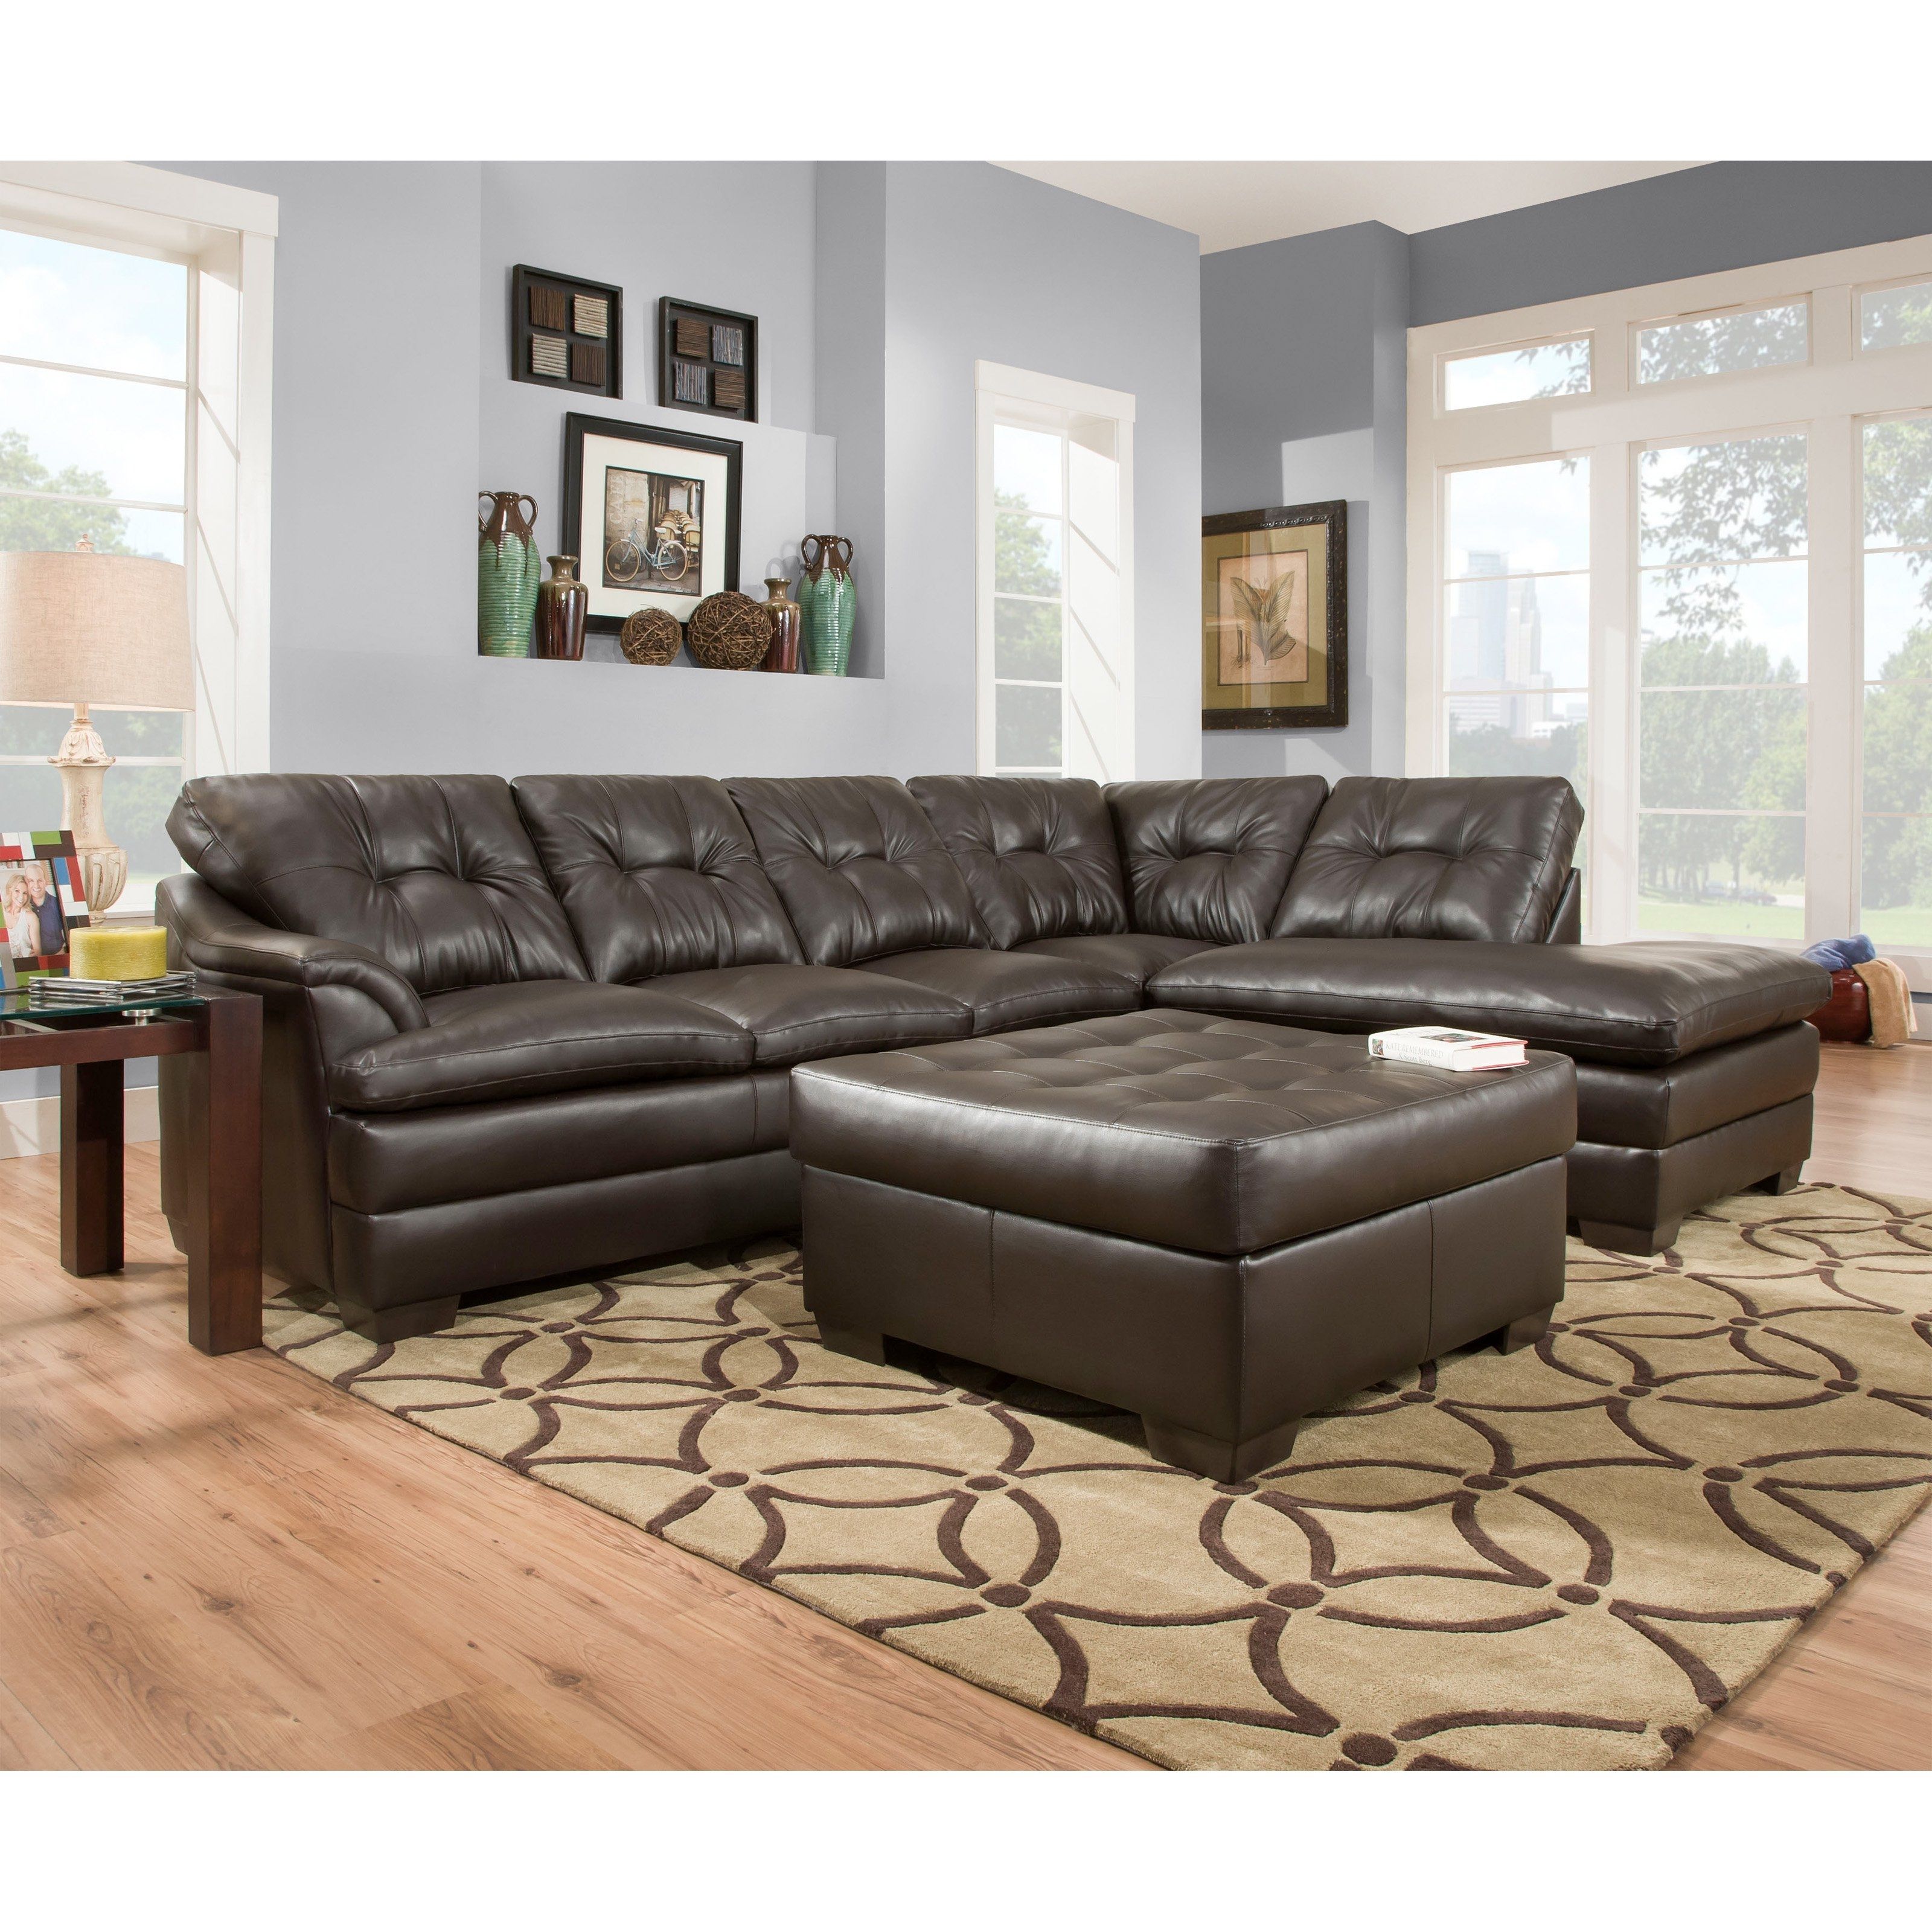 Simmons Upholstery Apollo Sectional With Optional Ottoman Throughout Nanaimo Sectional Sofas (View 9 of 10)